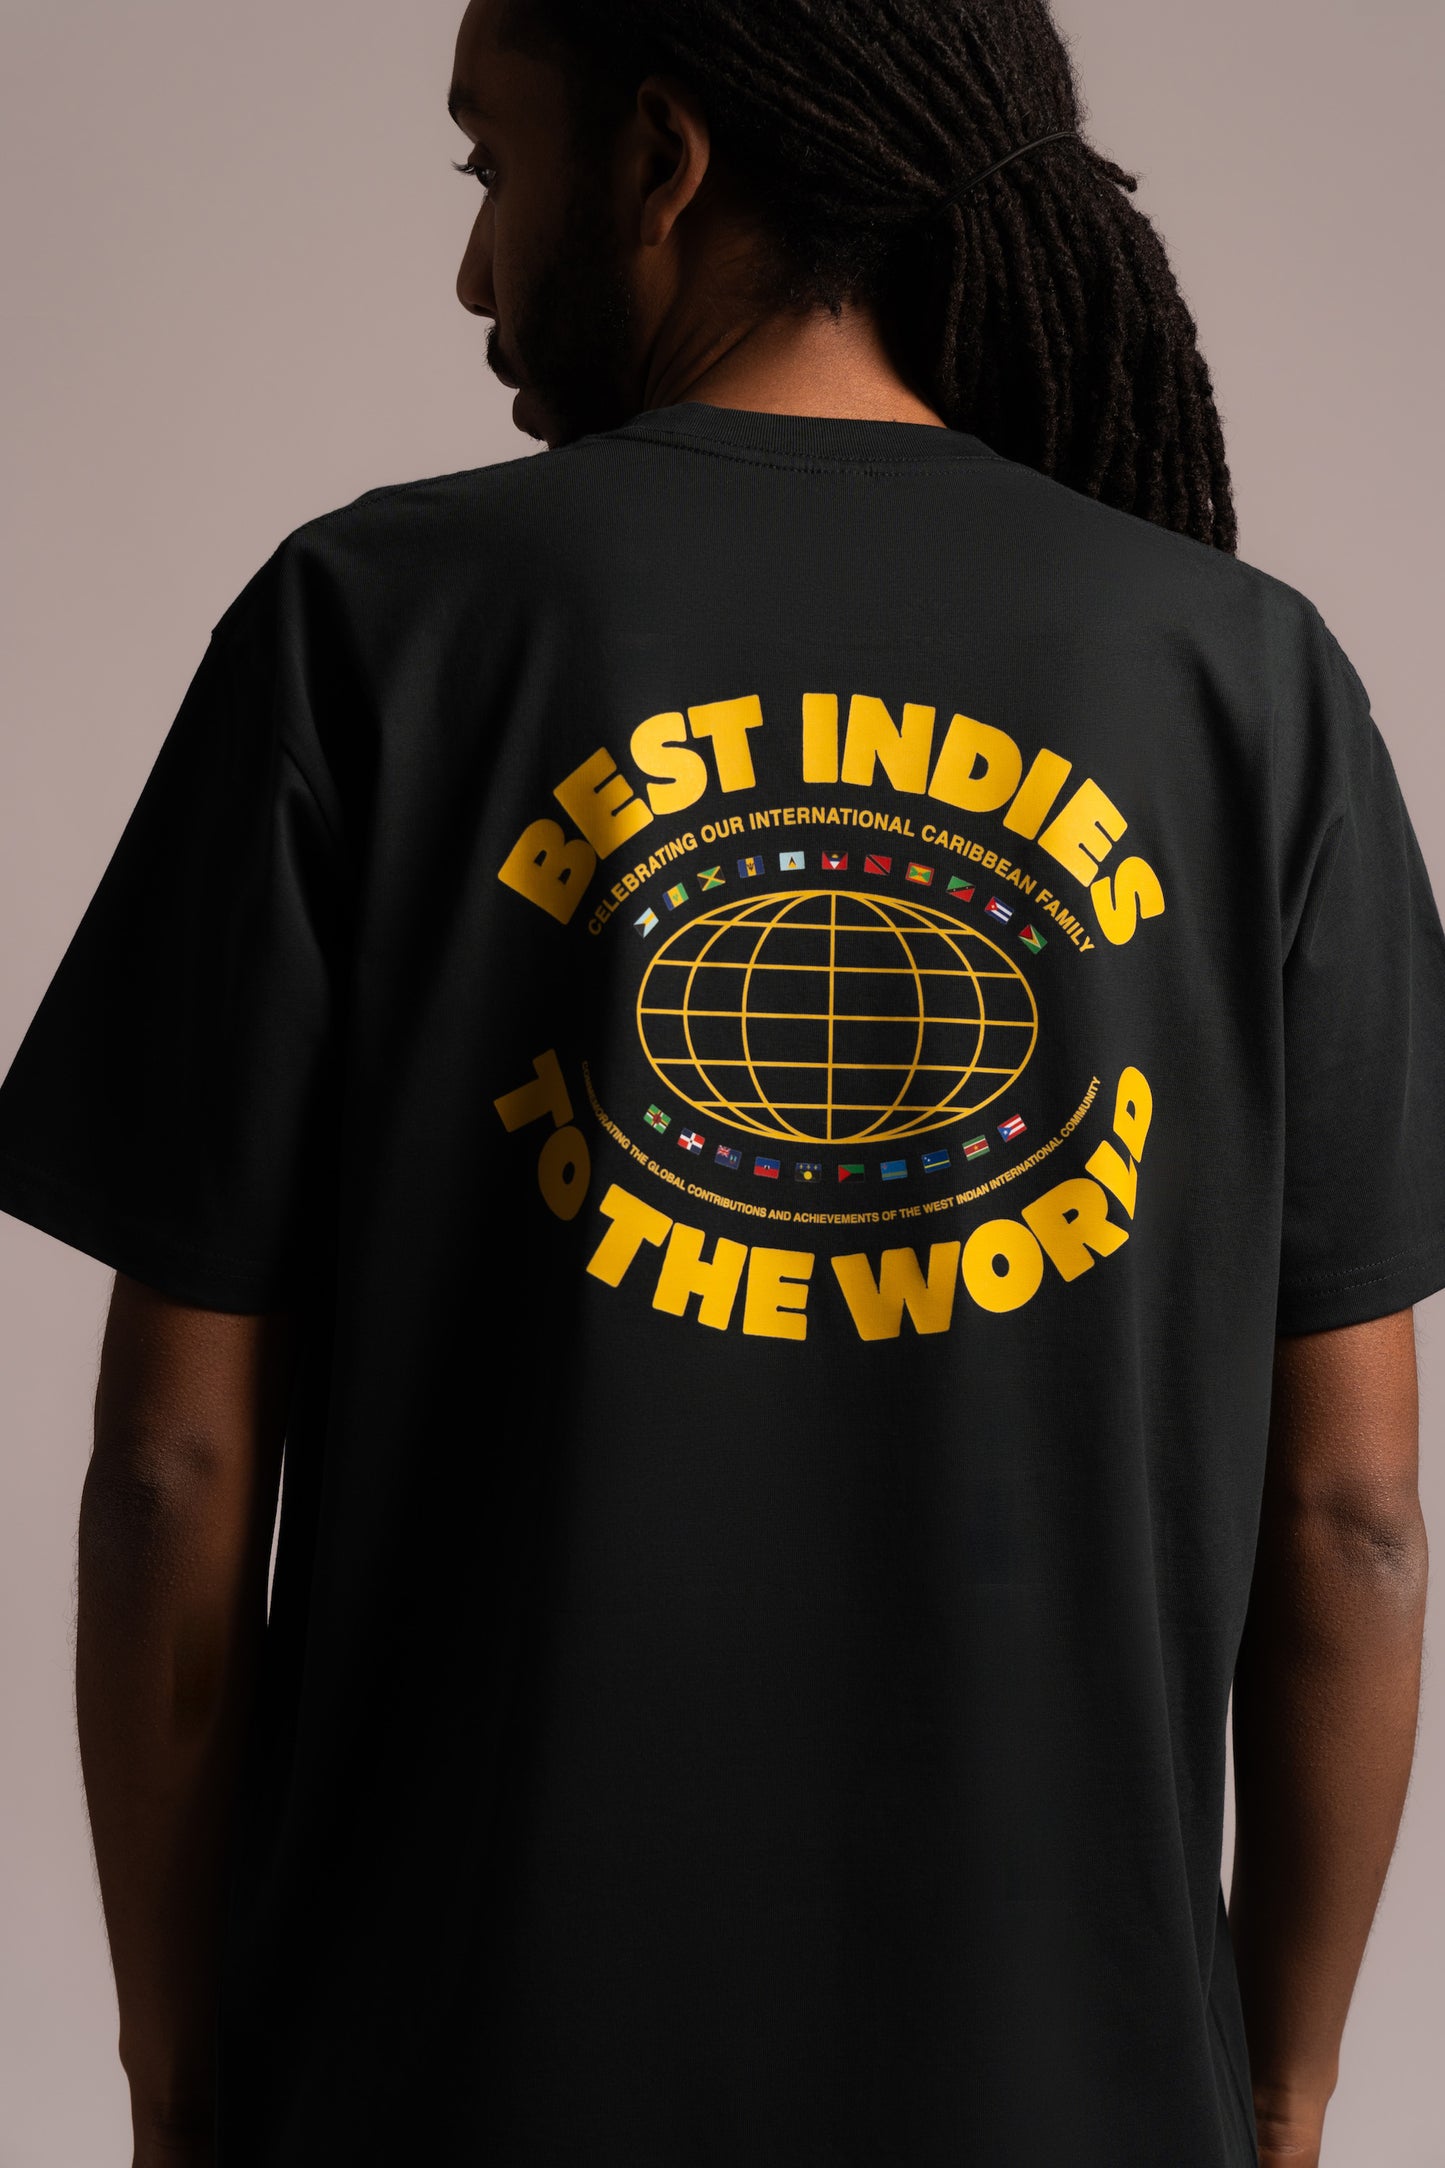 Best Indies To The World - Black T-Shirt